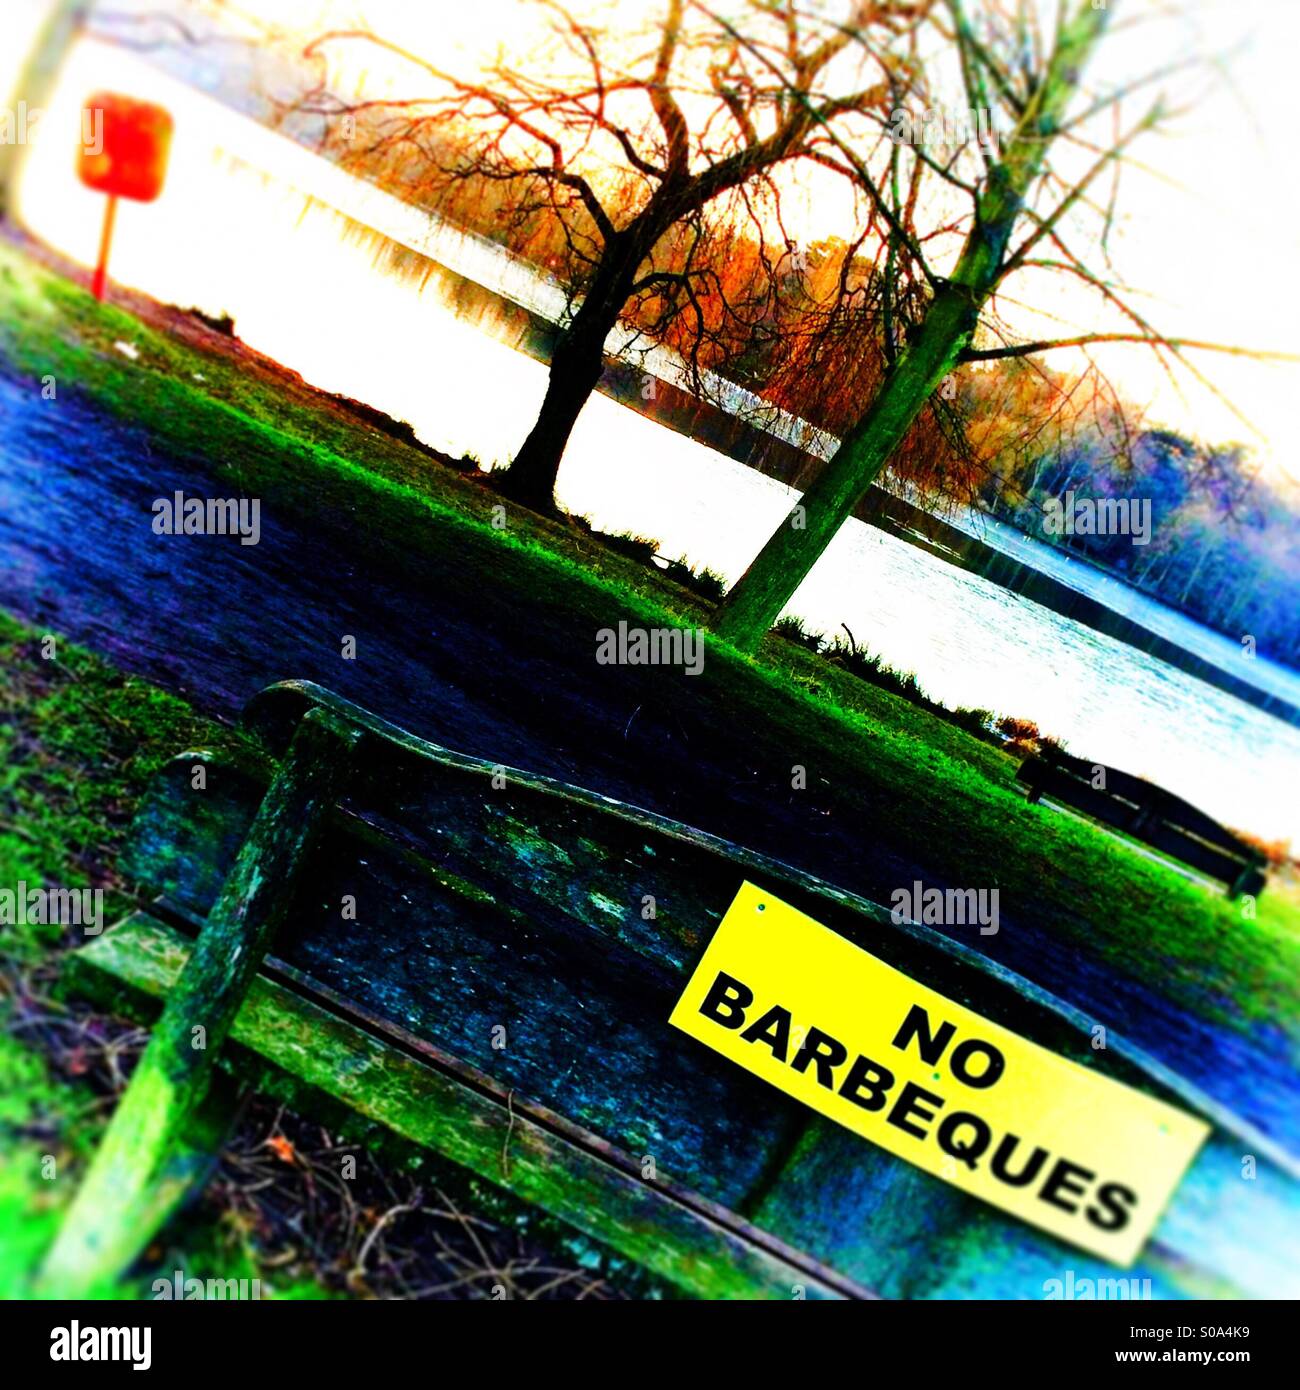 No barbecues Stock Photo